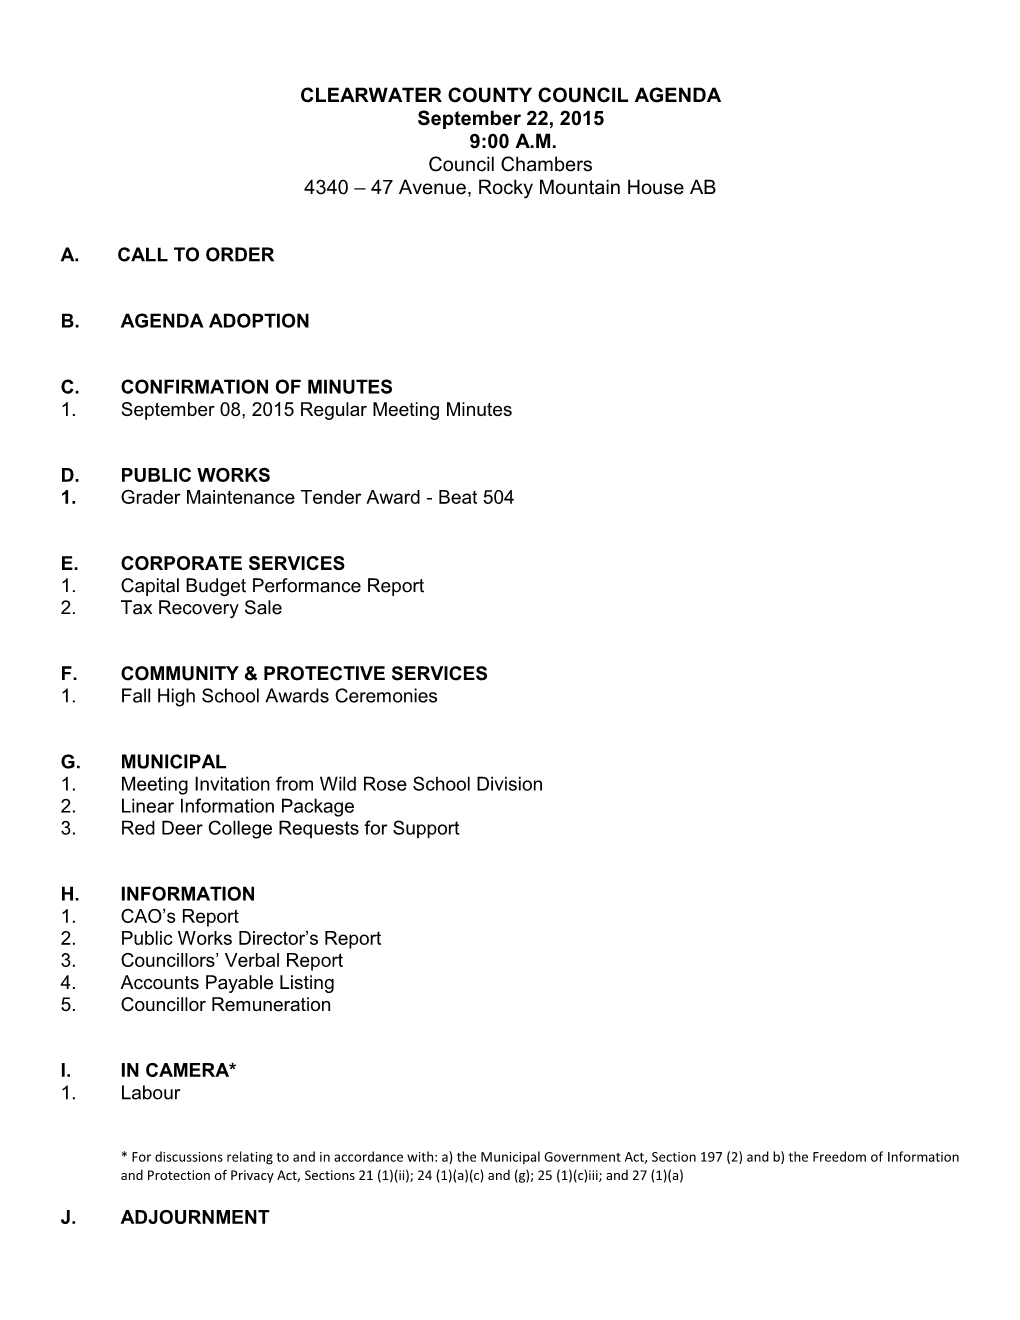 CLEARWATER COUNTY COUNCIL AGENDA September 22, 2015 9:00 A.M. Council Chambers 4340 – 47 Avenue, Rocky Mountain House AB